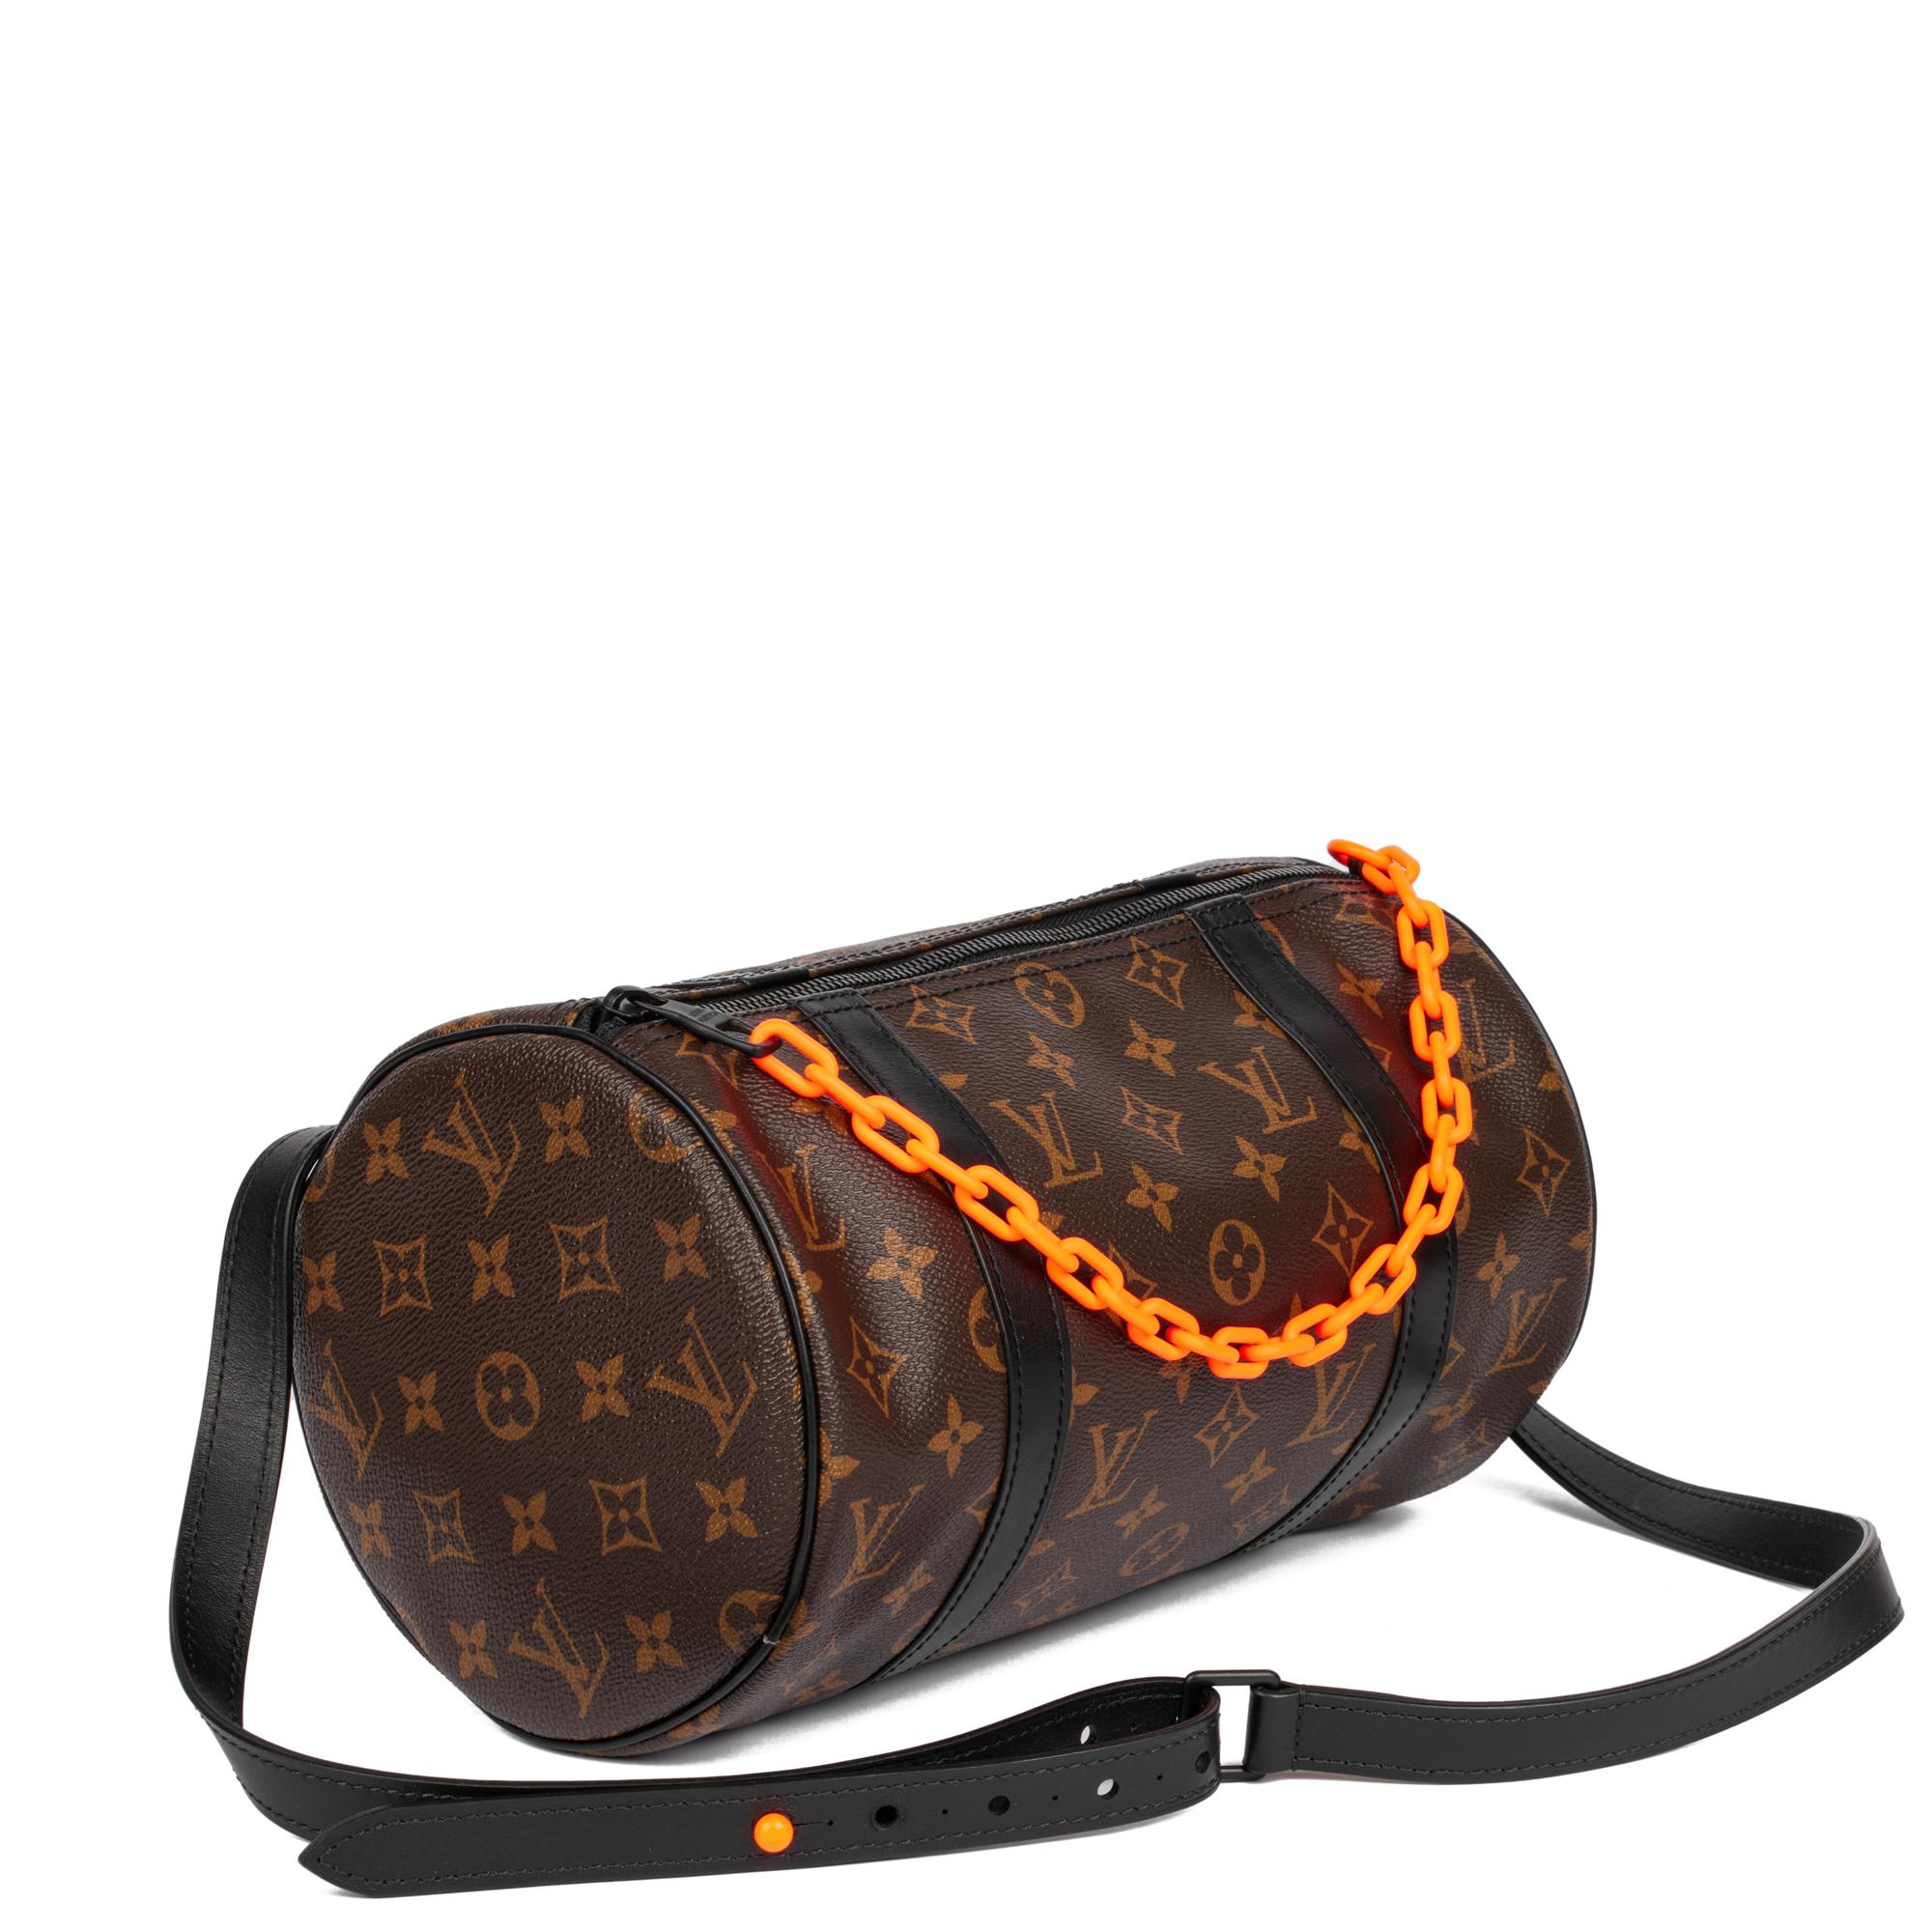 LOUIS VUITTON
x Virgil Abloh Brown Monogram Coated Canvas & Black Calfskin Leather Solar Ray Papillon

Xupes Reference: HB5174
Serial Number: AR0189
Age (Circa): 2019
Accompanied By: Louis Vuitton Dust Bag
Authenticity Details: Date Stamp (Made in